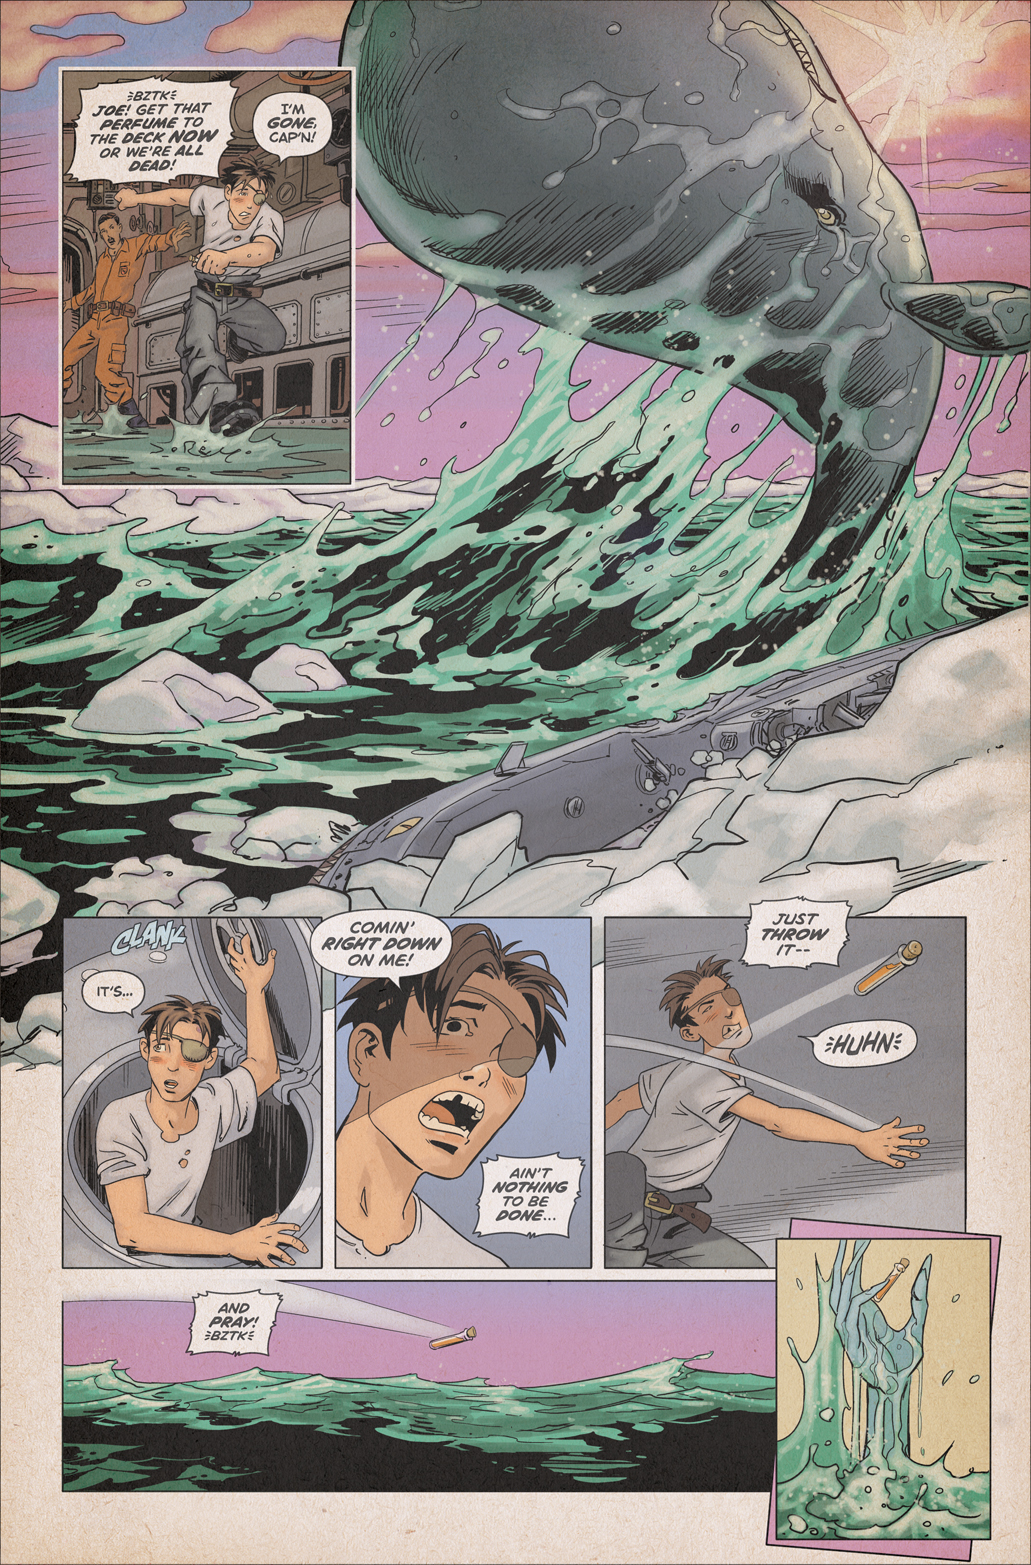 Secret of the Beaufort Sea – Page 36